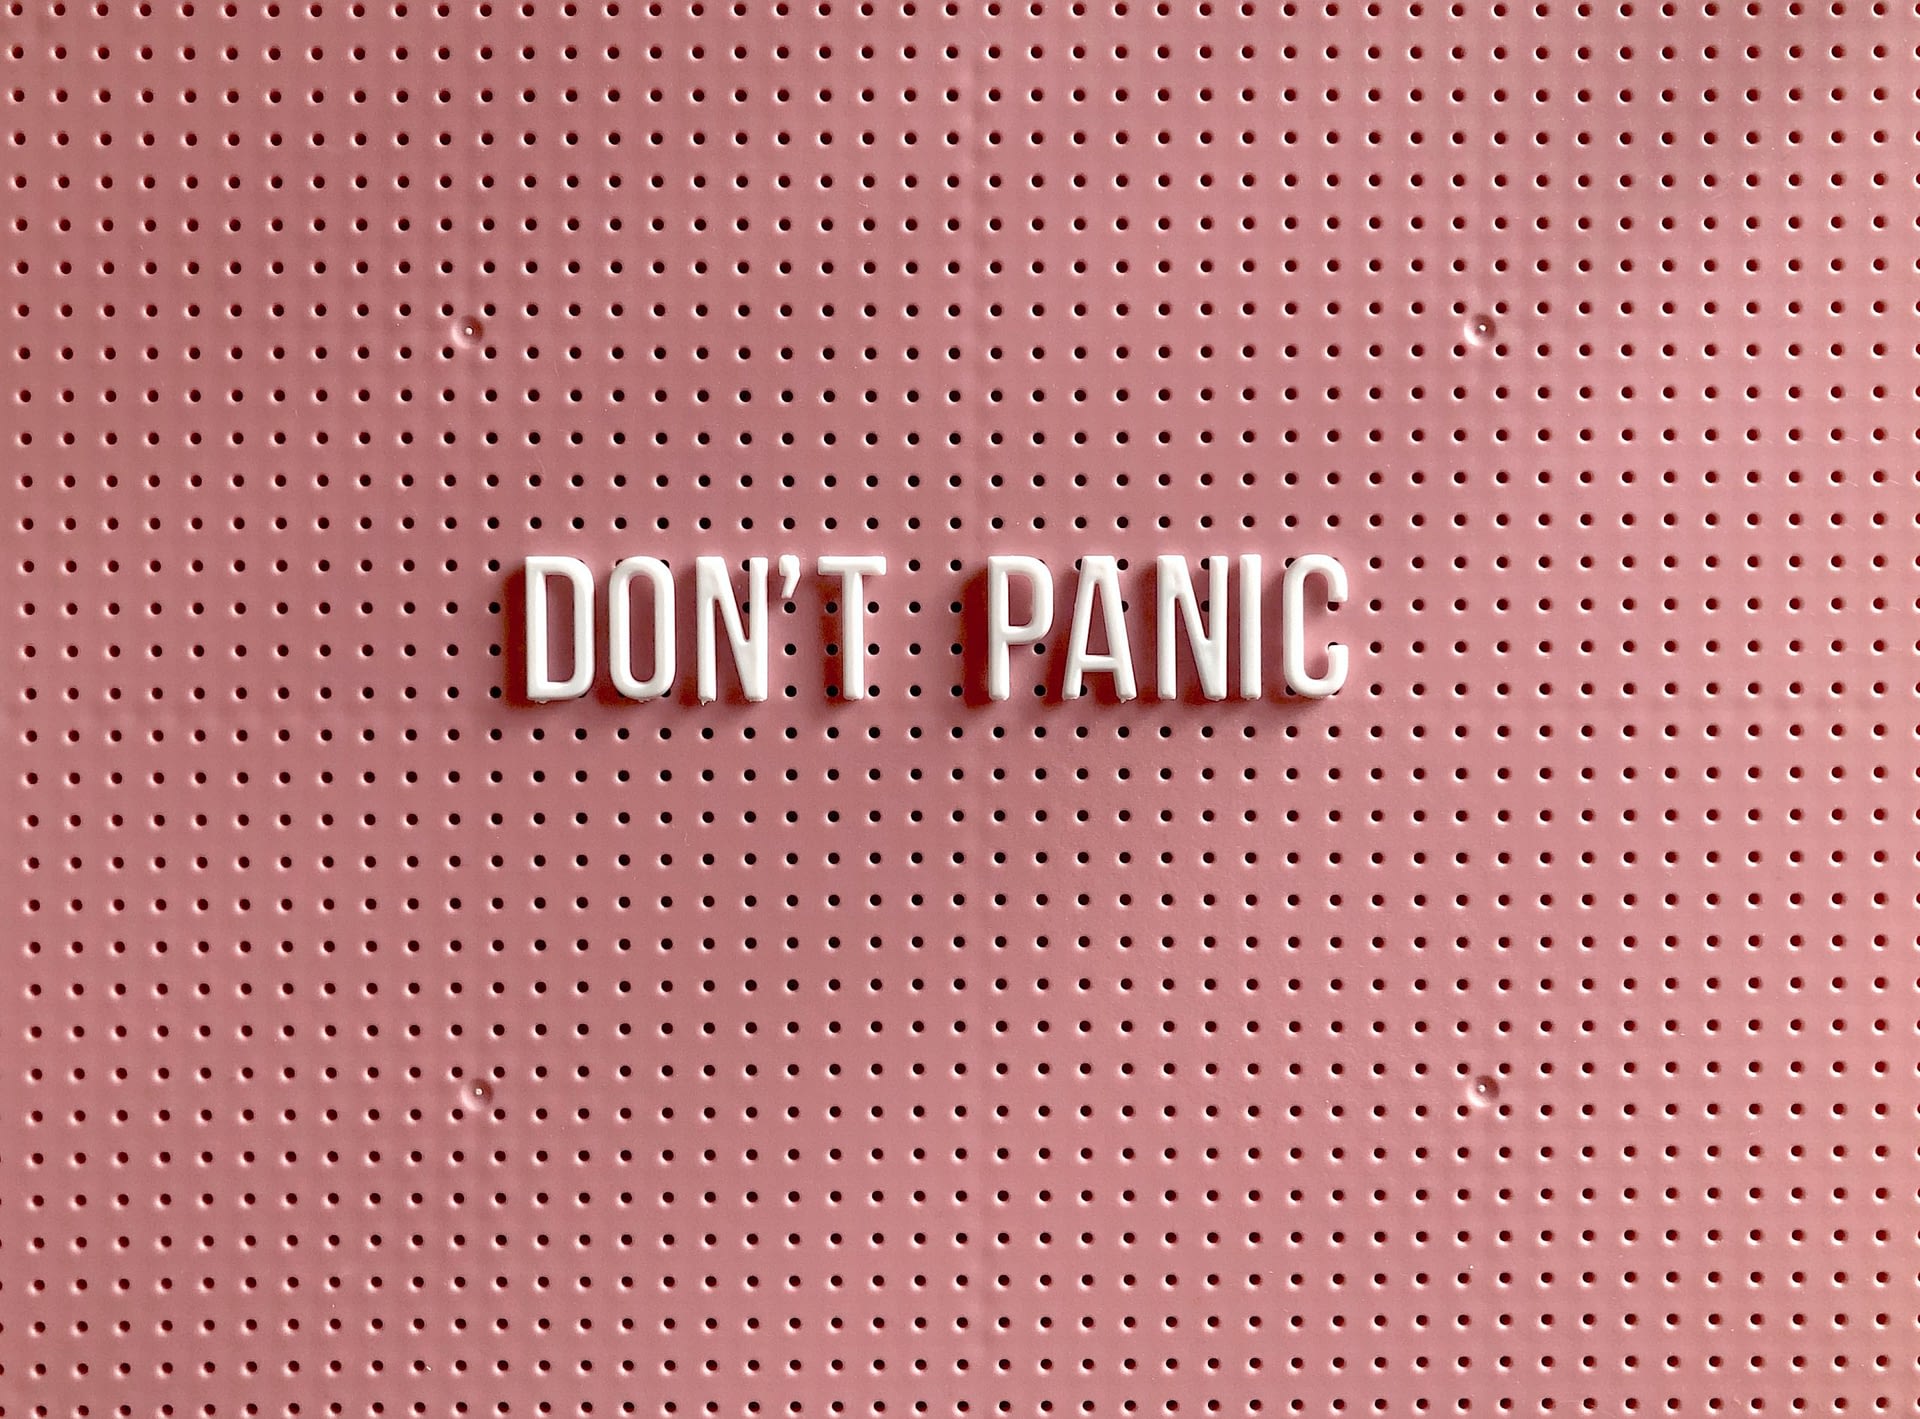 pinboard saying don't panic suggesting anxiety